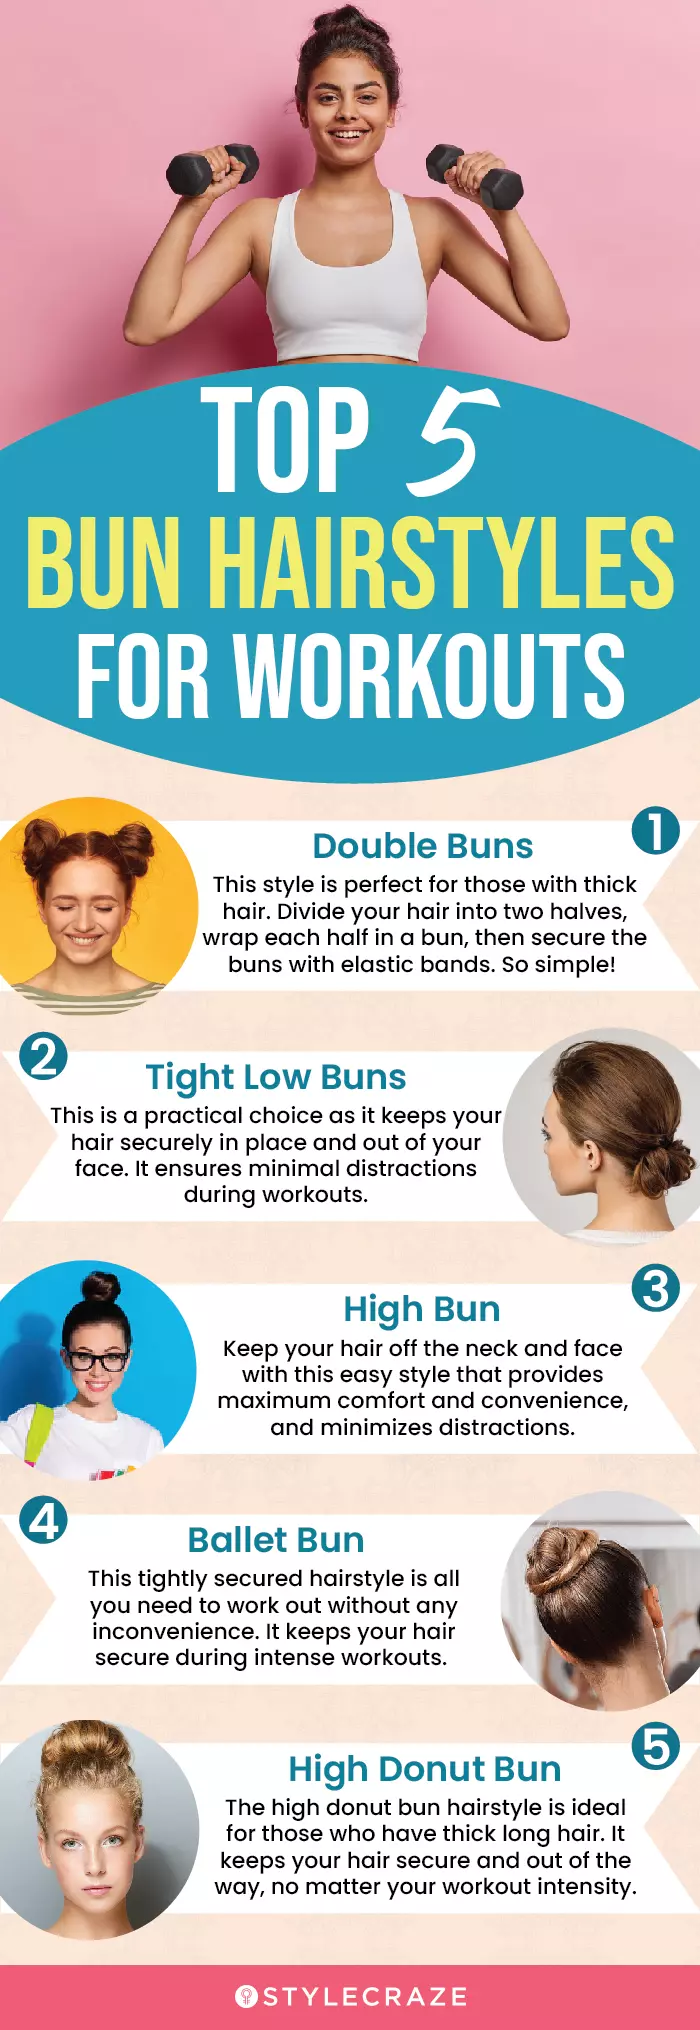 top 5 bun hairstyles for workouts (infographic)